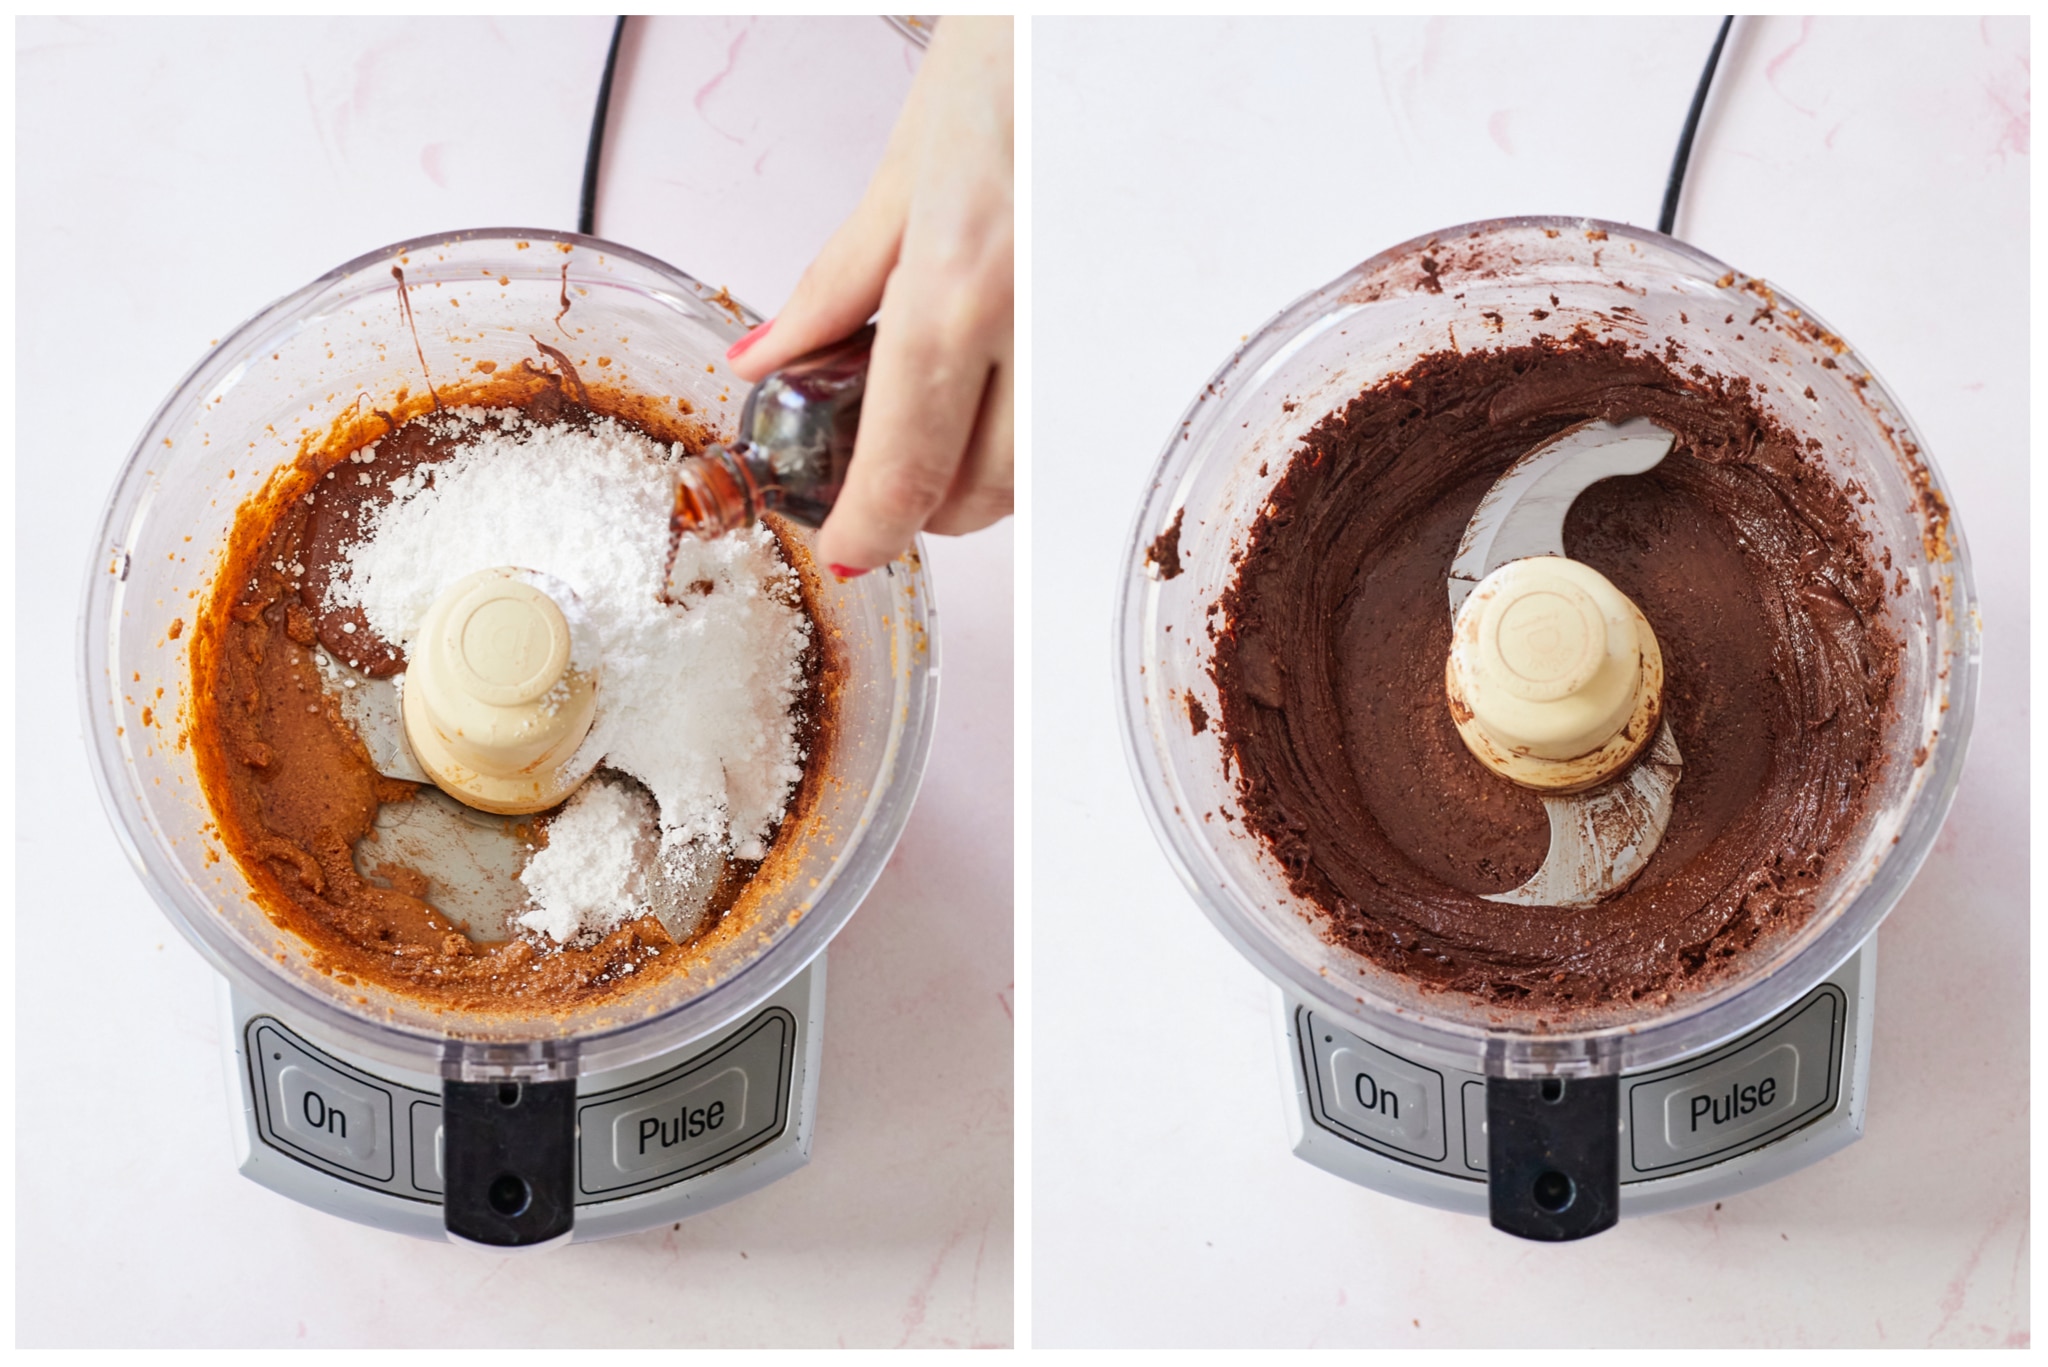 More ingredients being added to the food processor on the left, and the mixed Nutella spread on the right.